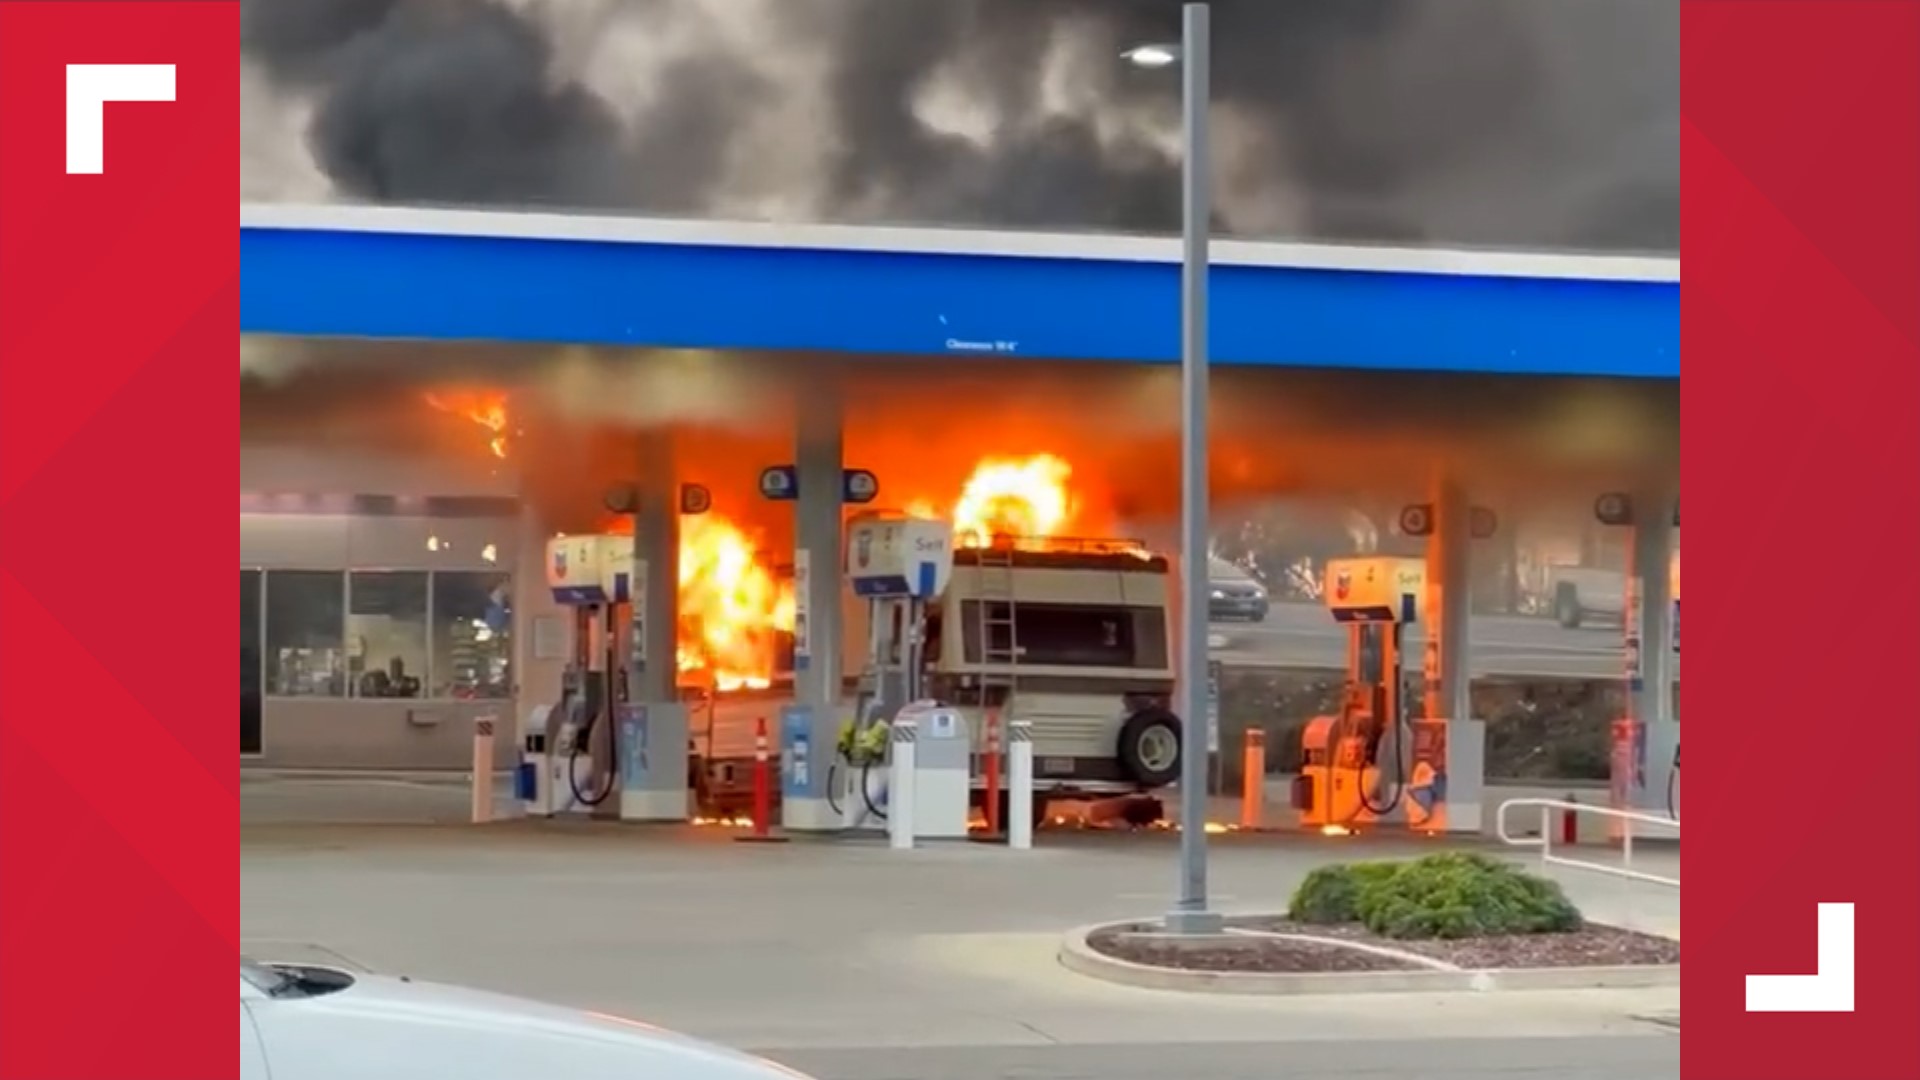 Modesto Fire Department says an RV caught fire at the pump in Ceres. Officials say two people were hurt and taken to the hospital with minor injuries